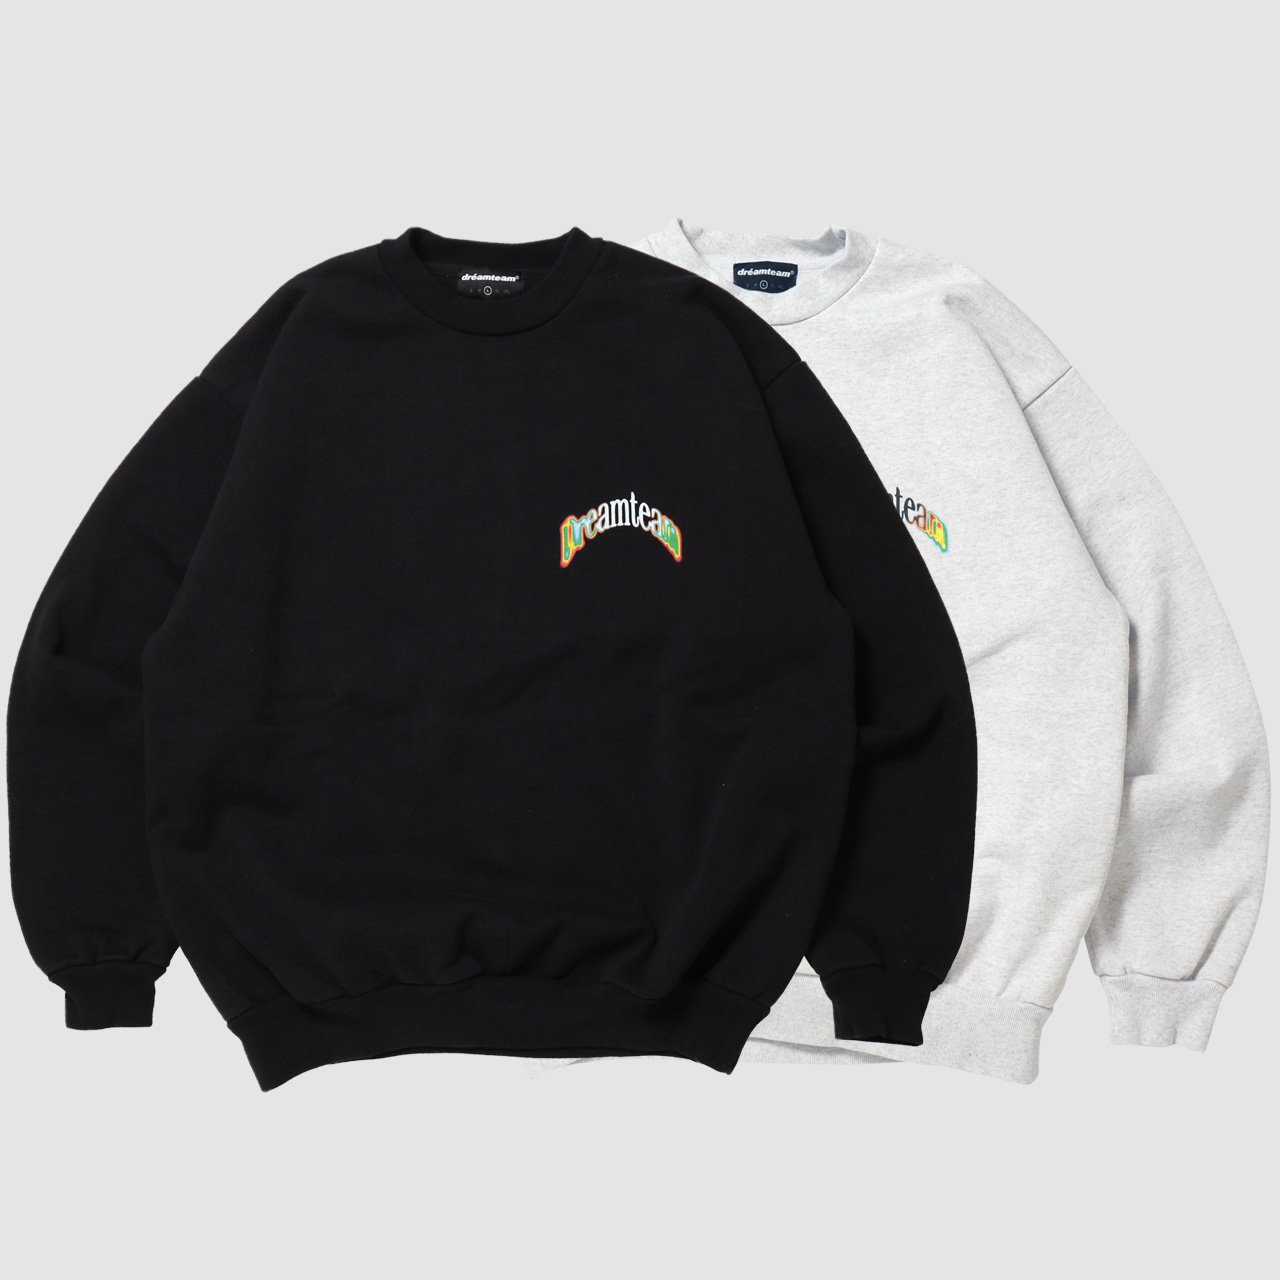 <img class='new_mark_img1' src='https://img.shop-pro.jp/img/new/icons20.gif' style='border:none;display:inline;margin:0px;padding:0px;width:auto;' />DT Thermography Logo Crewneck Sweat